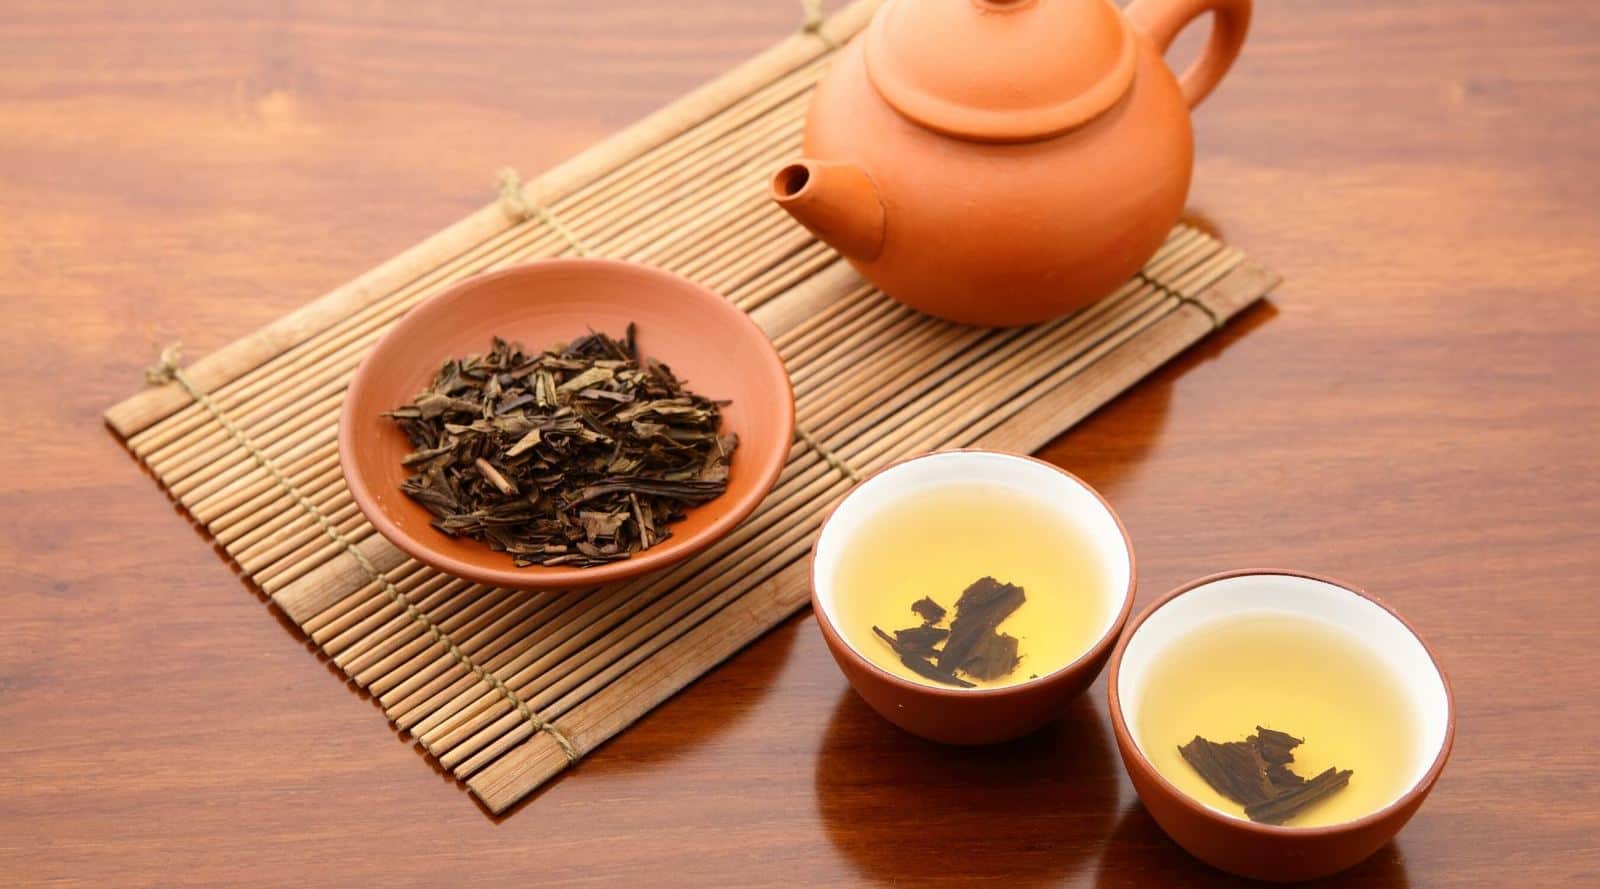 learn the history of tea in china, the birthplace of tea